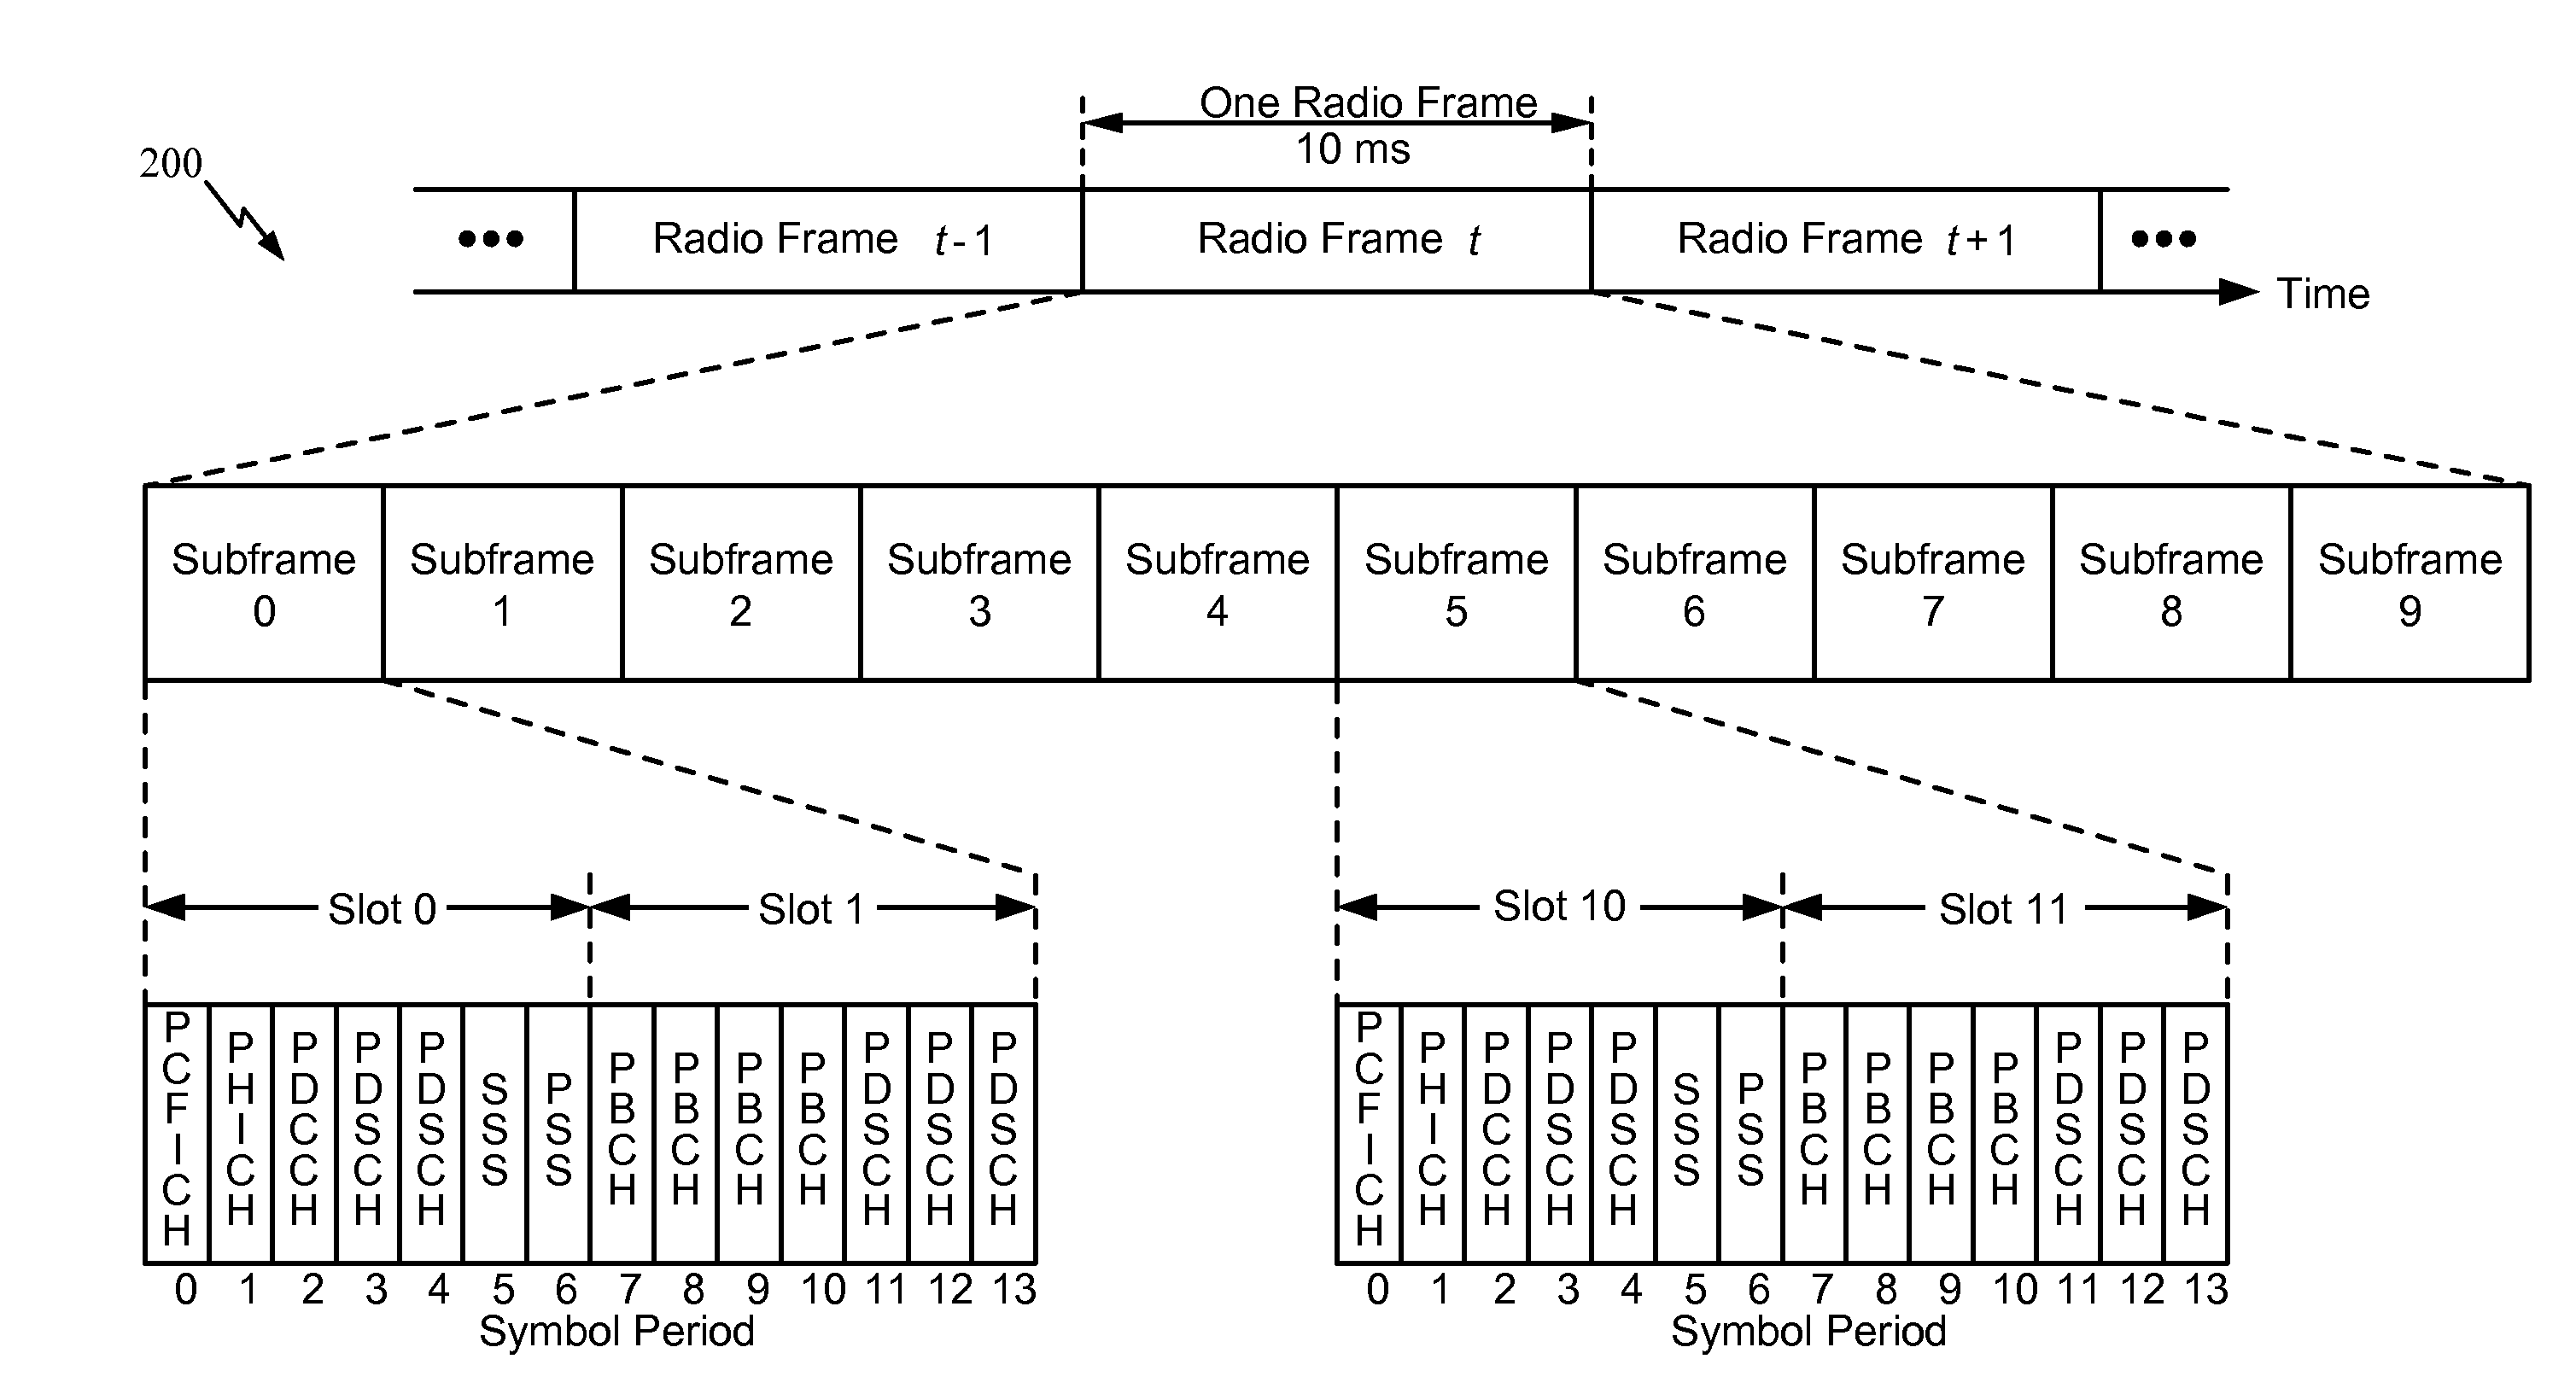 Techniques for configuring an adaptive frame structure for wireless communications using unlicensed radio frequency spectrum